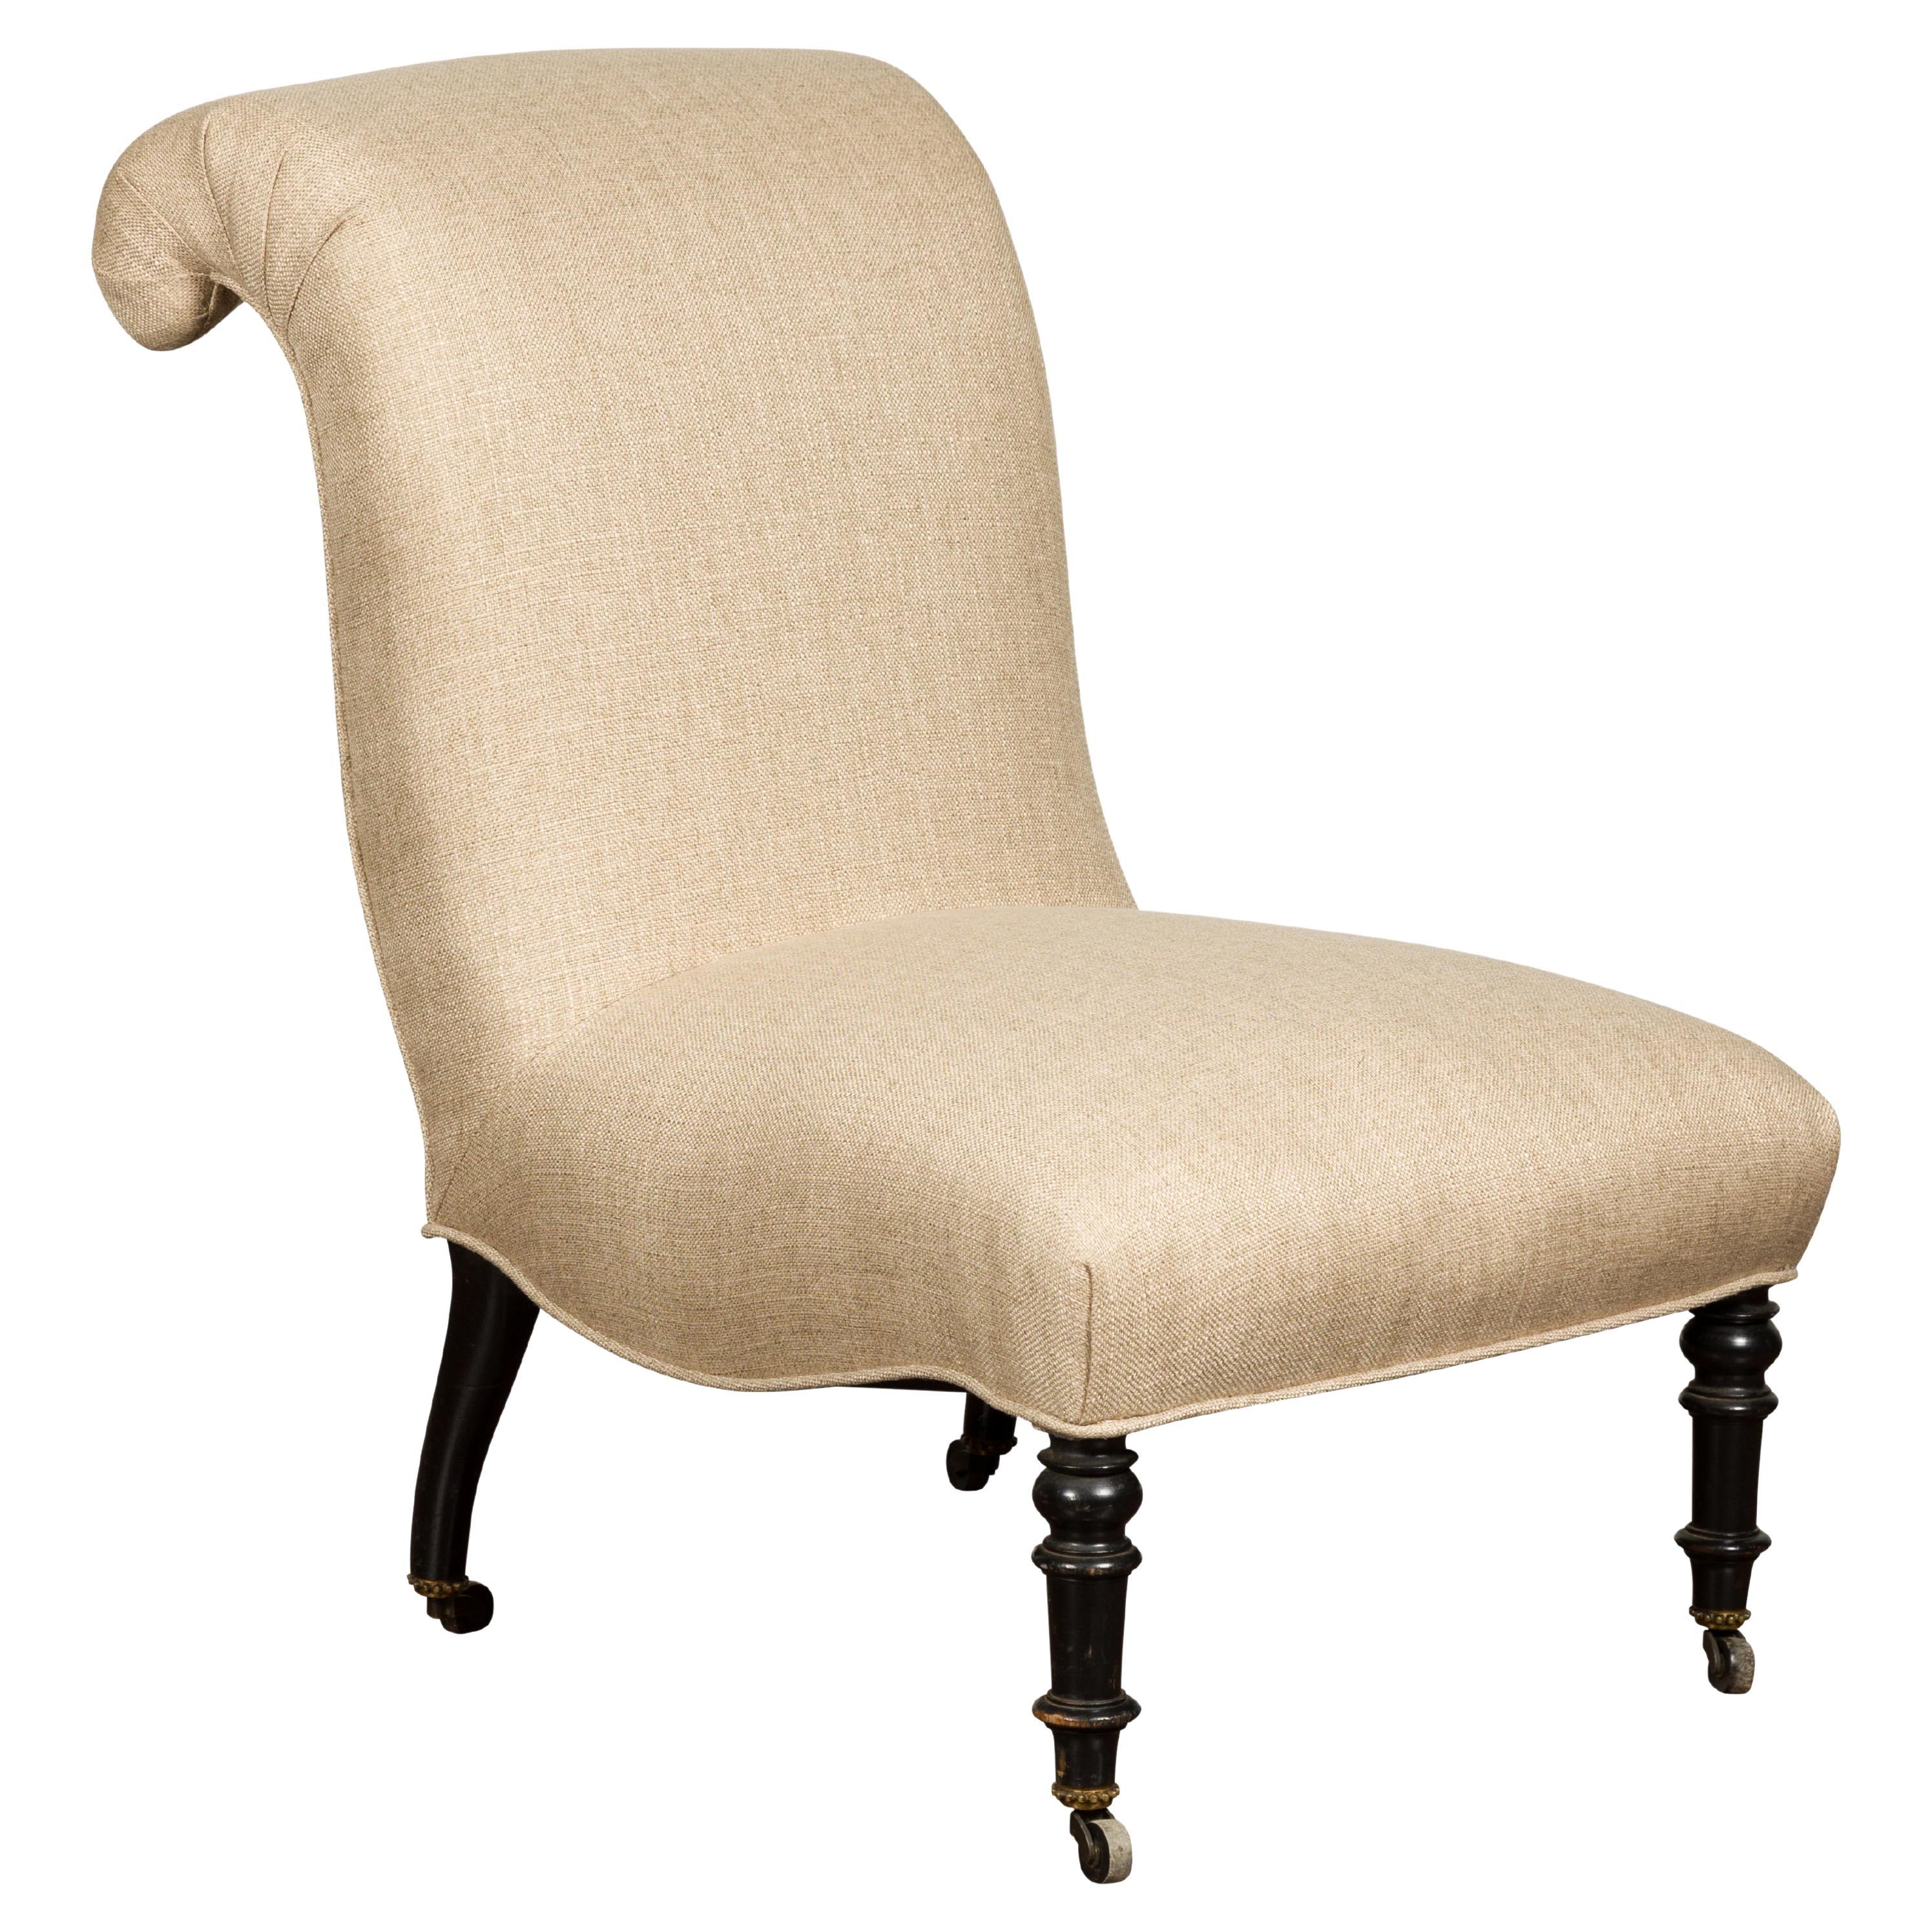 1900s Turn of the Century French Slipper Chair with Out-Scrolling Back For Sale